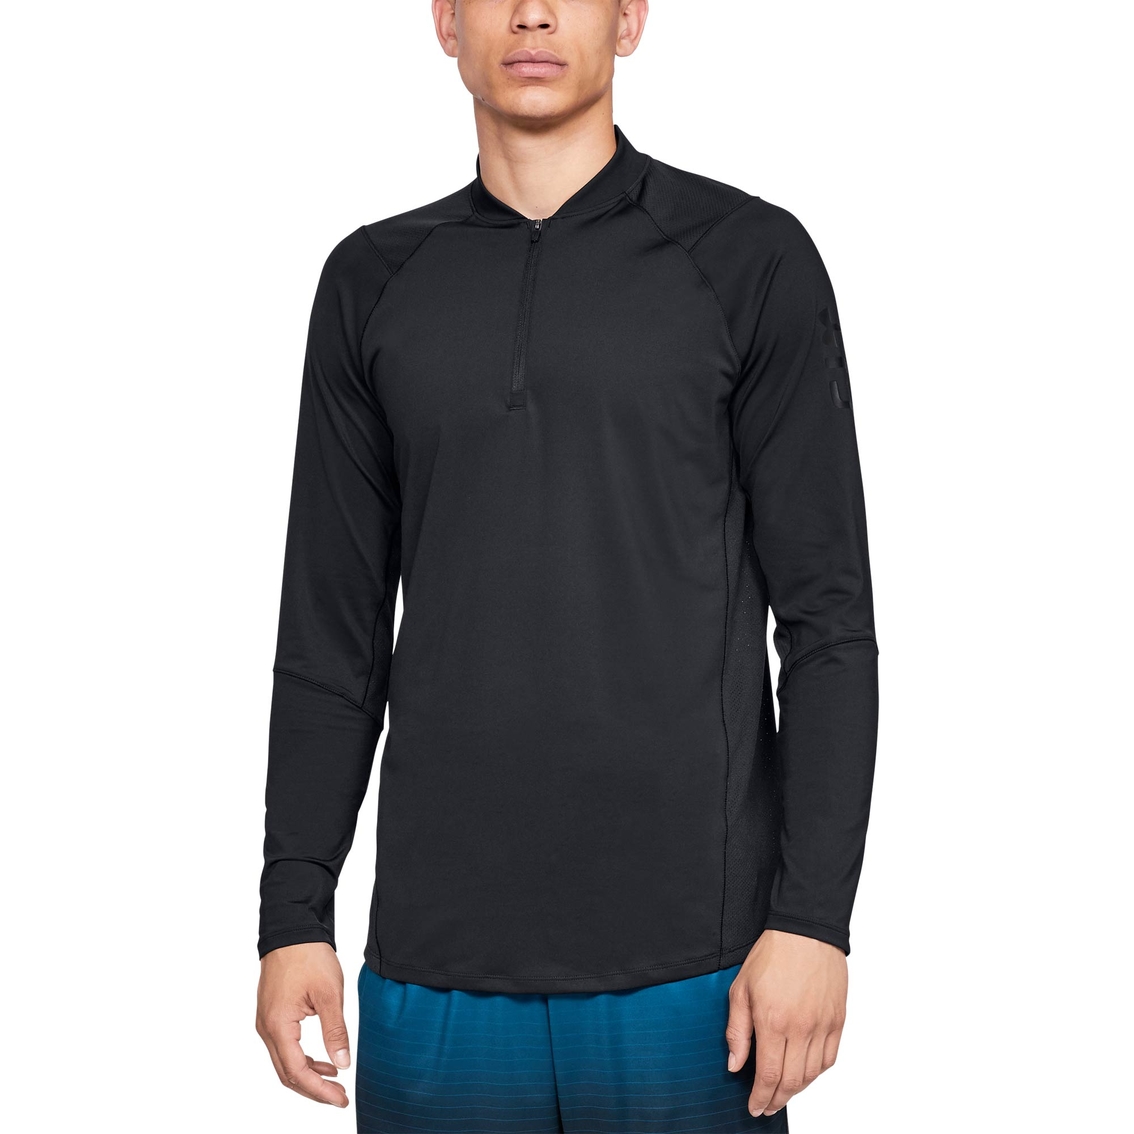 Under Armour Mk1 Quarter Zip Graphic Warmup Top | Shirts | Father's Day ...